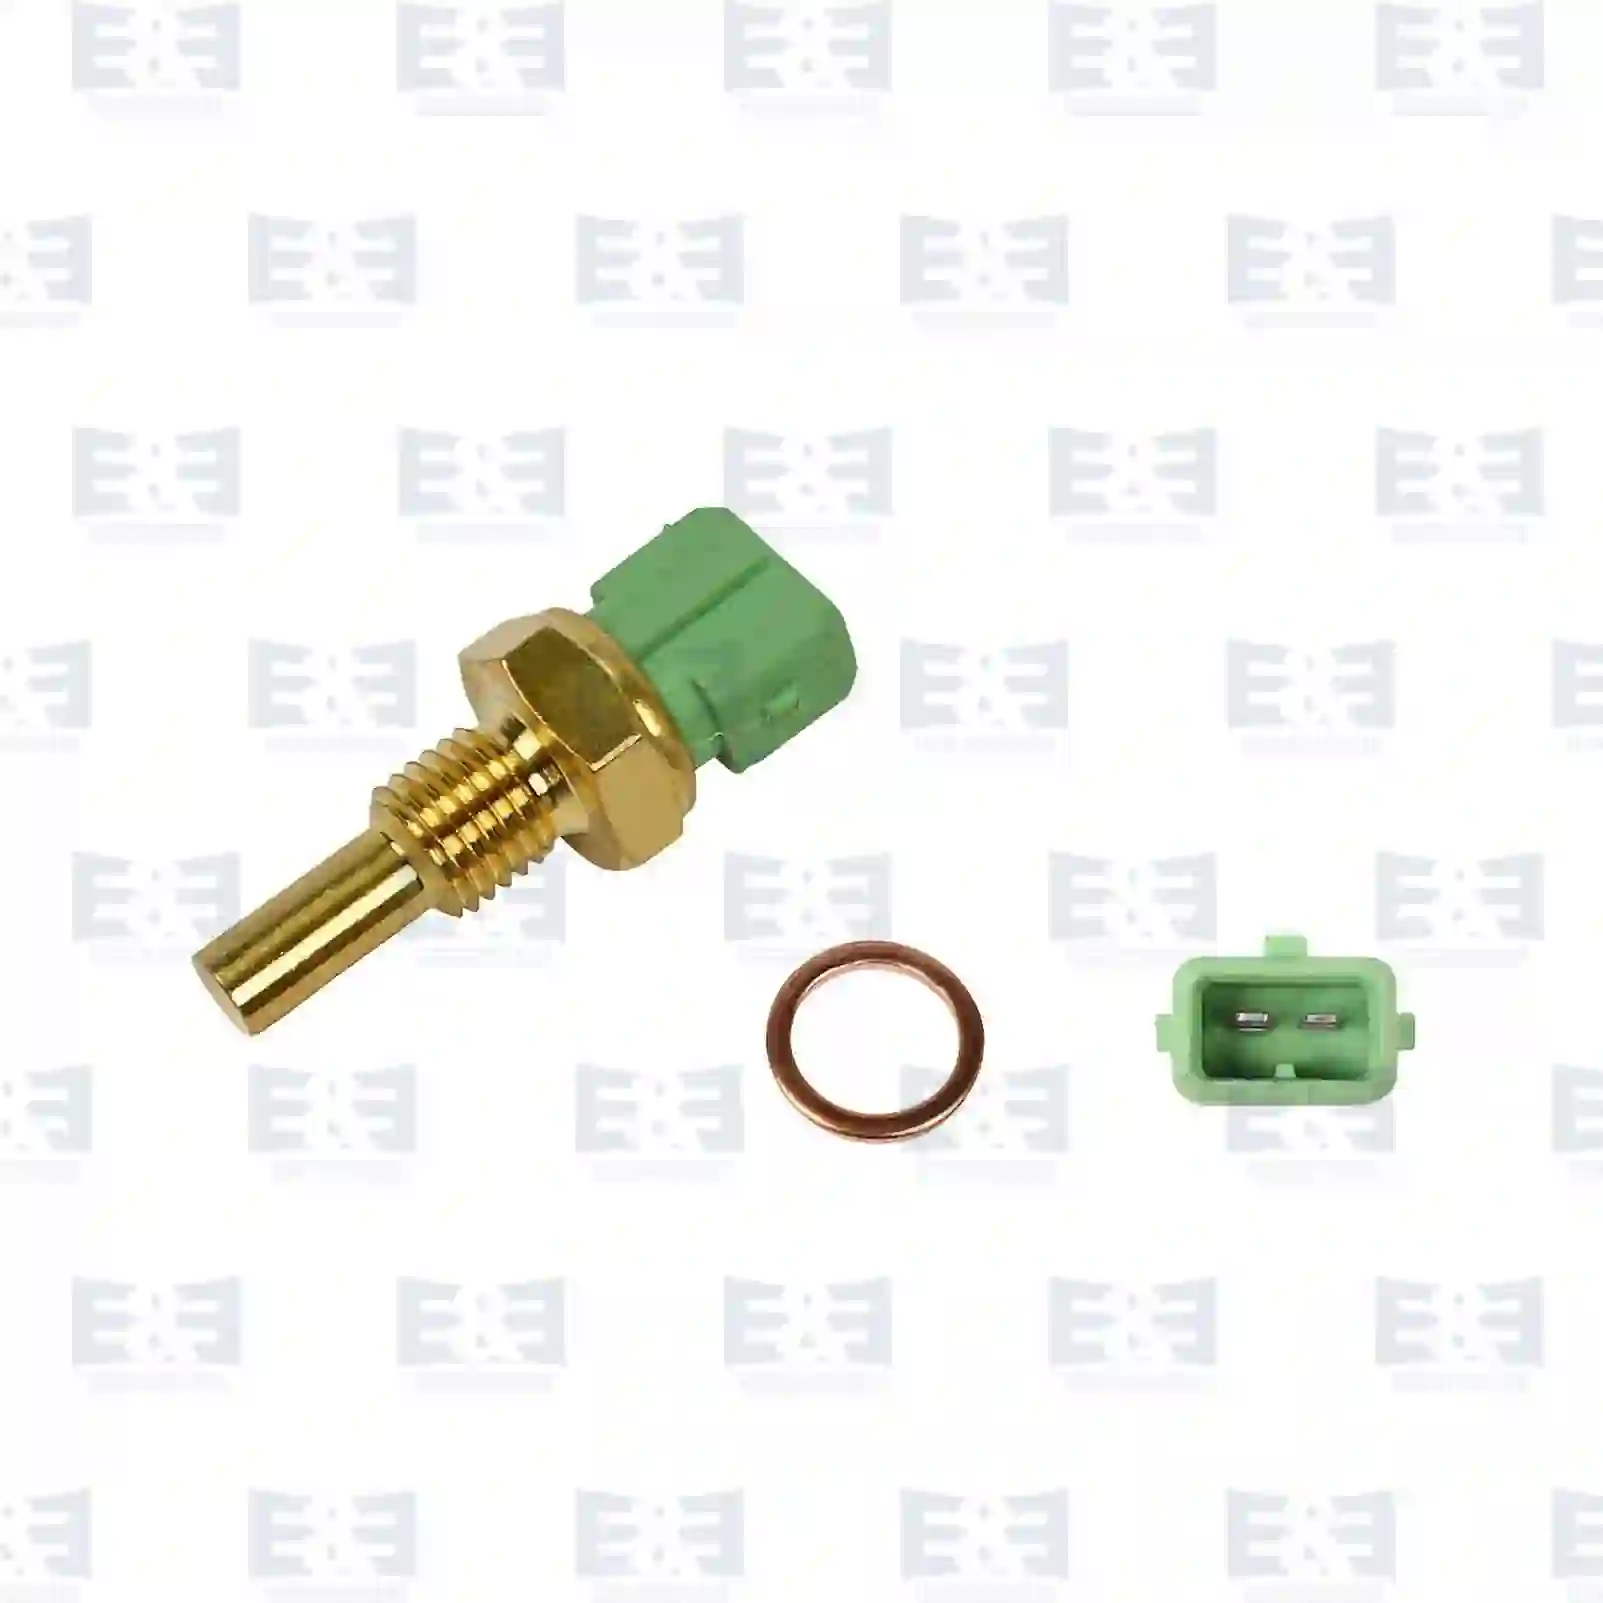 Temperature sensor, 2E2203955, 04393601, 04850371, 05972332, 07547977, 07695581, 07738223, 07770239, 09946866, 11911110100, 119111101000, 1953211010, 195321101000, 1953211010000, 46125769, 46477022, 605132050, 605233830, 60513205, 60523383, 60528383, 60800167, 60806379, 60808142, 60813751, 98424793, 820004, 004435008, 004435010, 025906041, 6U0919501, UE71610, 1284397, 1357414, 1401945, 1709966, 1709967, 13621284397, 13621357414, 13621401945, 13621709966, 13621709967, 13622242184, 90080939, 9160301, 45962029F, 00001338A5, 024246, 133857, 1338A5, 19203F, 0280130026, 39389002, 125380, 125769, 172750, 46477022, 4850371, 5972332, 60808142, 7547977, 7695581, 7770239, 98424793, 04393601, 04850371, 05972332, 06081220, 06081224, 07547977, 07695581, 07702239, 07738223, 07770239, 09946866, 30523666, 46125769, 46477022, 50009755, 5972332, 605132050, 605233830, 60513205, 60523383, 60528383, 60800167, 60806379, 60808142, 60813751, 98424793, 1207003, 1639283, 1957002, 1C1R-7H141-AA, 7072695, 94720065561, 1338444, 1338451, 1338458, 1338548, 30523666, 6238317, 90018835, 90080039, 90080939, 90410192, 90410792, 90411977, 90487859, 90510183, 9160301, 92017805, 9275979, 93184580, 93358883, 94205866, 96060084, 30506984, 30523666, 8942058660, 90410792, 90411977, 92017805, 37870-P5T-G00, 37870-PDF-E00, 37870-PDF-E01, 39220-22000, 39220-22010, 11023V0700, 2263010G00, 22630G2402, 22630G2404, 22630N4200, 46477022, 5972332, 98424793, 8-94205866-0, 04393601, 04850371, 05972332, 07738223, 46477022, 5972332, 60808142, 98424793, DAC4737, UKC2525, 45962029F, 0K737-18840, 39220-22000, 39220-22010, 39220-22020, 00125769, 04393601, 04850371, 05972332, 07547977, 07695581, 07770239, 09946866, 119111101000, 195321101000, 46125769, 46477022, 605132050, 605233830, 60513205, 60523383, 60528383, 60800167, 60806379, 60808142, 60813751, 98424793, ERR2081, 0770034, 89422-05010, 89422-05020, 470079800, AW311467, 29729460, 11023-G7000, 11023-V0700, 22630-10G00, 22630-G2402, 22630-G2404, 22630-N4200, 22630-P8100, 1338443, 1338444, 1338451, 1338458, 1338541, 1342850, 1738451, 4416020, 4500001, 6238317, 8933631, 8983631, 00001338A5, 024246, 133857, 1338A5, 19203F, 92860612501, 94460612500, 9966062239A, 0770287460, 5001865578, 7700267388, 7700582688, 7702087460, UE71610, ERR2081, GTR204, 4503132, 4770228, 756356, 7563562, 90510183, 91514549, 935702, 9357021, 004435008, 004435010, 025906041, 6U0919501, 004435008, 004435010, 025906041, 6U0919501, 55450, 55506, 22630AA000, 13650-60B00, 13650-60B00-000, 13650-84101, 13650-84101-000, 9141454980, 9151454980, A51454980, 89422-05010, 89422-05020, 1306937, 13069370, 1332396, 13323960, 13323969, 004435008, 004435010, 025906041, 026906161, 6U0919501 ||  2E2203955 E&E Truck Spare Parts | Truck Spare Parts, Auotomotive Spare Parts Temperature sensor, 2E2203955, 04393601, 04850371, 05972332, 07547977, 07695581, 07738223, 07770239, 09946866, 11911110100, 119111101000, 1953211010, 195321101000, 1953211010000, 46125769, 46477022, 605132050, 605233830, 60513205, 60523383, 60528383, 60800167, 60806379, 60808142, 60813751, 98424793, 820004, 004435008, 004435010, 025906041, 6U0919501, UE71610, 1284397, 1357414, 1401945, 1709966, 1709967, 13621284397, 13621357414, 13621401945, 13621709966, 13621709967, 13622242184, 90080939, 9160301, 45962029F, 00001338A5, 024246, 133857, 1338A5, 19203F, 0280130026, 39389002, 125380, 125769, 172750, 46477022, 4850371, 5972332, 60808142, 7547977, 7695581, 7770239, 98424793, 04393601, 04850371, 05972332, 06081220, 06081224, 07547977, 07695581, 07702239, 07738223, 07770239, 09946866, 30523666, 46125769, 46477022, 50009755, 5972332, 605132050, 605233830, 60513205, 60523383, 60528383, 60800167, 60806379, 60808142, 60813751, 98424793, 1207003, 1639283, 1957002, 1C1R-7H141-AA, 7072695, 94720065561, 1338444, 1338451, 1338458, 1338548, 30523666, 6238317, 90018835, 90080039, 90080939, 90410192, 90410792, 90411977, 90487859, 90510183, 9160301, 92017805, 9275979, 93184580, 93358883, 94205866, 96060084, 30506984, 30523666, 8942058660, 90410792, 90411977, 92017805, 37870-P5T-G00, 37870-PDF-E00, 37870-PDF-E01, 39220-22000, 39220-22010, 11023V0700, 2263010G00, 22630G2402, 22630G2404, 22630N4200, 46477022, 5972332, 98424793, 8-94205866-0, 04393601, 04850371, 05972332, 07738223, 46477022, 5972332, 60808142, 98424793, DAC4737, UKC2525, 45962029F, 0K737-18840, 39220-22000, 39220-22010, 39220-22020, 00125769, 04393601, 04850371, 05972332, 07547977, 07695581, 07770239, 09946866, 119111101000, 195321101000, 46125769, 46477022, 605132050, 605233830, 60513205, 60523383, 60528383, 60800167, 60806379, 60808142, 60813751, 98424793, ERR2081, 0770034, 89422-05010, 89422-05020, 470079800, AW311467, 29729460, 11023-G7000, 11023-V0700, 22630-10G00, 22630-G2402, 22630-G2404, 22630-N4200, 22630-P8100, 1338443, 1338444, 1338451, 1338458, 1338541, 1342850, 1738451, 4416020, 4500001, 6238317, 8933631, 8983631, 00001338A5, 024246, 133857, 1338A5, 19203F, 92860612501, 94460612500, 9966062239A, 0770287460, 5001865578, 7700267388, 7700582688, 7702087460, UE71610, ERR2081, GTR204, 4503132, 4770228, 756356, 7563562, 90510183, 91514549, 935702, 9357021, 004435008, 004435010, 025906041, 6U0919501, 004435008, 004435010, 025906041, 6U0919501, 55450, 55506, 22630AA000, 13650-60B00, 13650-60B00-000, 13650-84101, 13650-84101-000, 9141454980, 9151454980, A51454980, 89422-05010, 89422-05020, 1306937, 13069370, 1332396, 13323960, 13323969, 004435008, 004435010, 025906041, 026906161, 6U0919501 ||  2E2203955 E&E Truck Spare Parts | Truck Spare Parts, Auotomotive Spare Parts